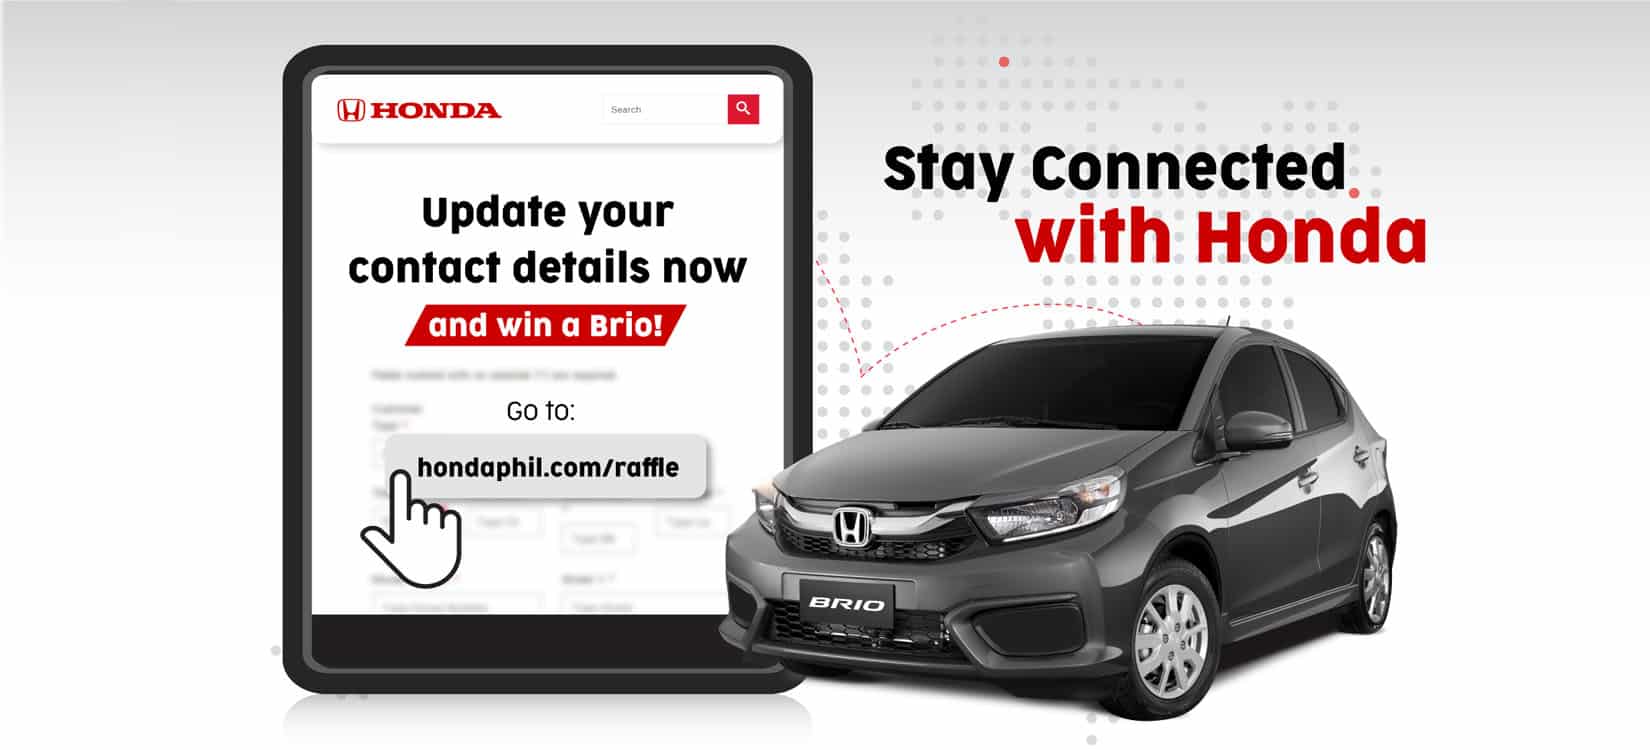 Honda Cars Philippines Honda Encourages Owners To Update Their Contact Information For A Chance To Win Honda Brio Other Exciting Prizes